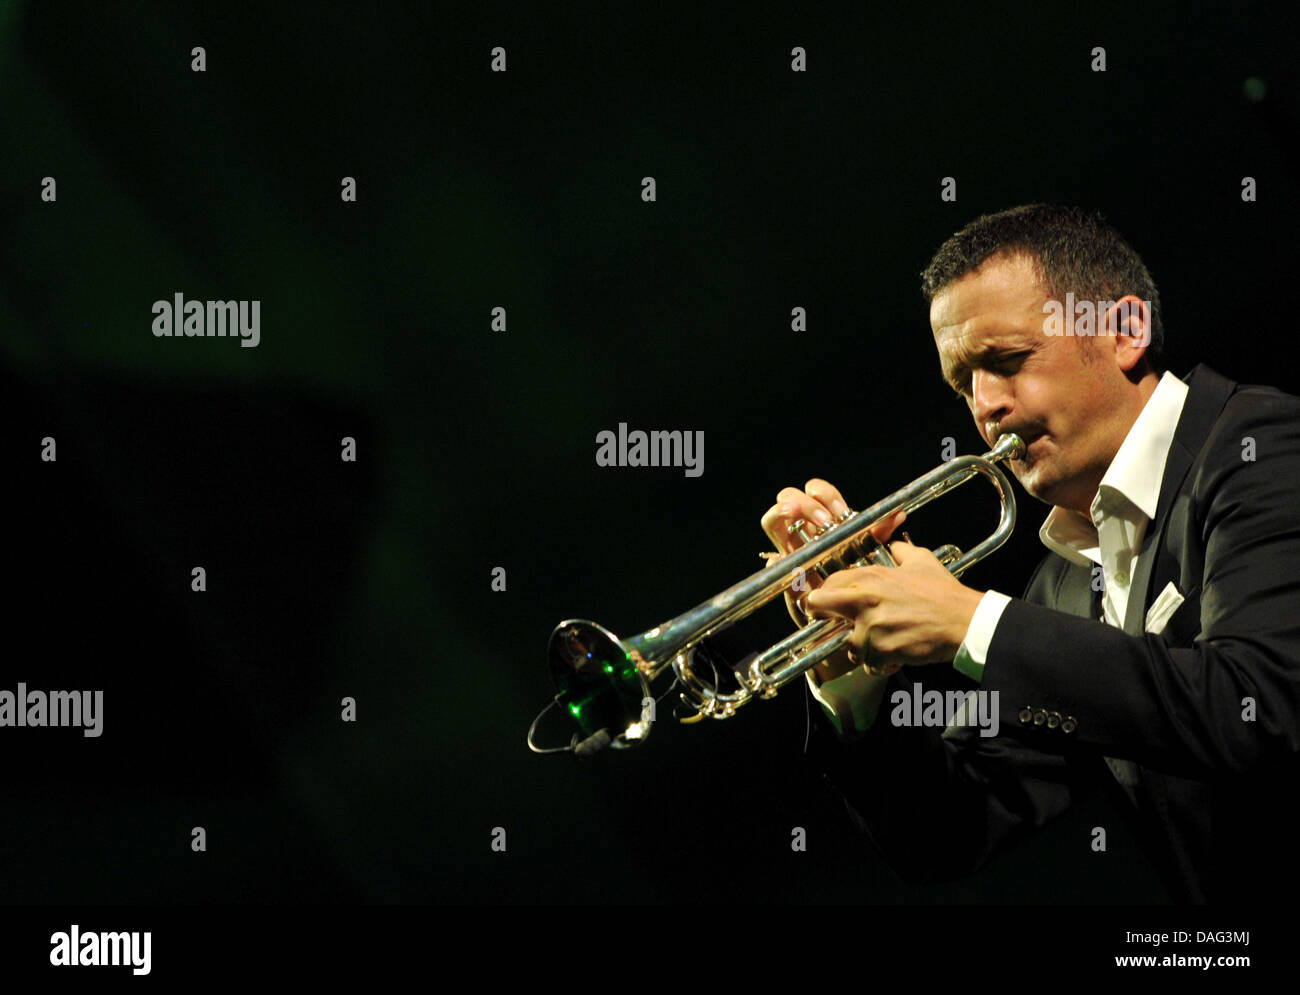 German jazz musician Till Broenner plays on his trumpet during the first performance of his Germany tour in Frankfurt, Germany, 15 March 2011. Broenner presented his new album 'At the End of the Day'. Photo: Arnde Dedert Stock Photo